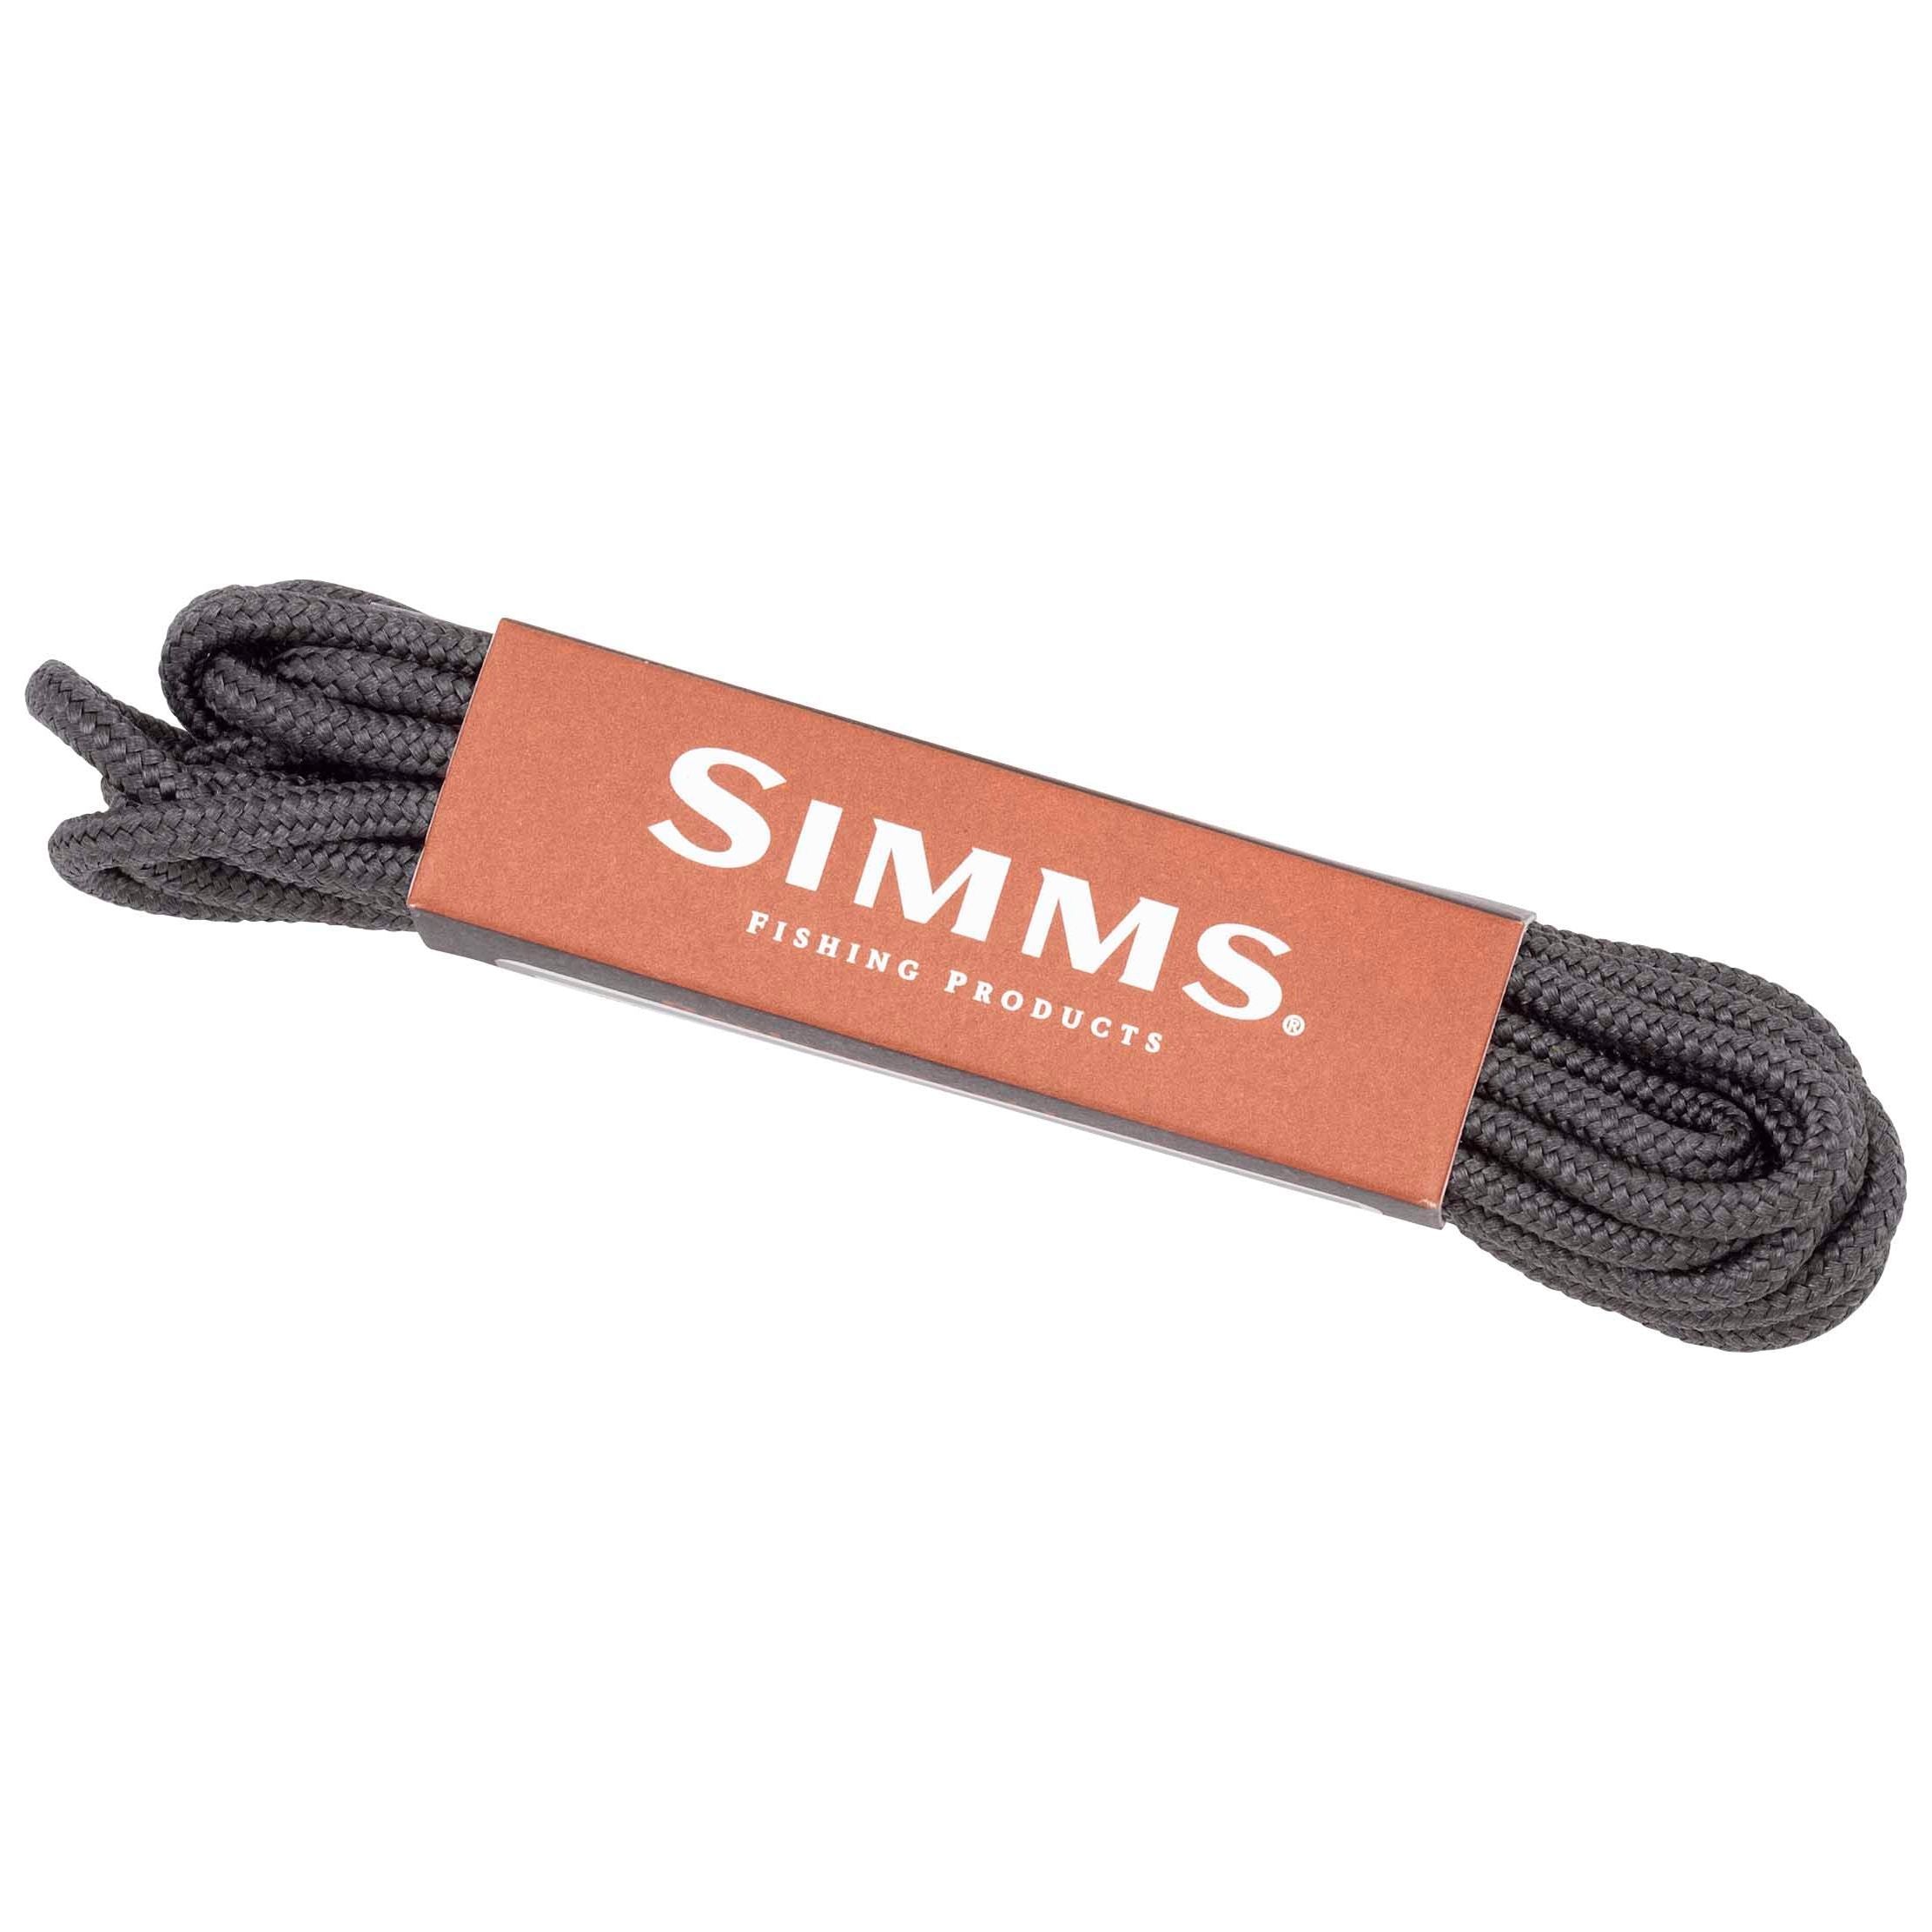 Simms Replacement Laces Pewter Image 1